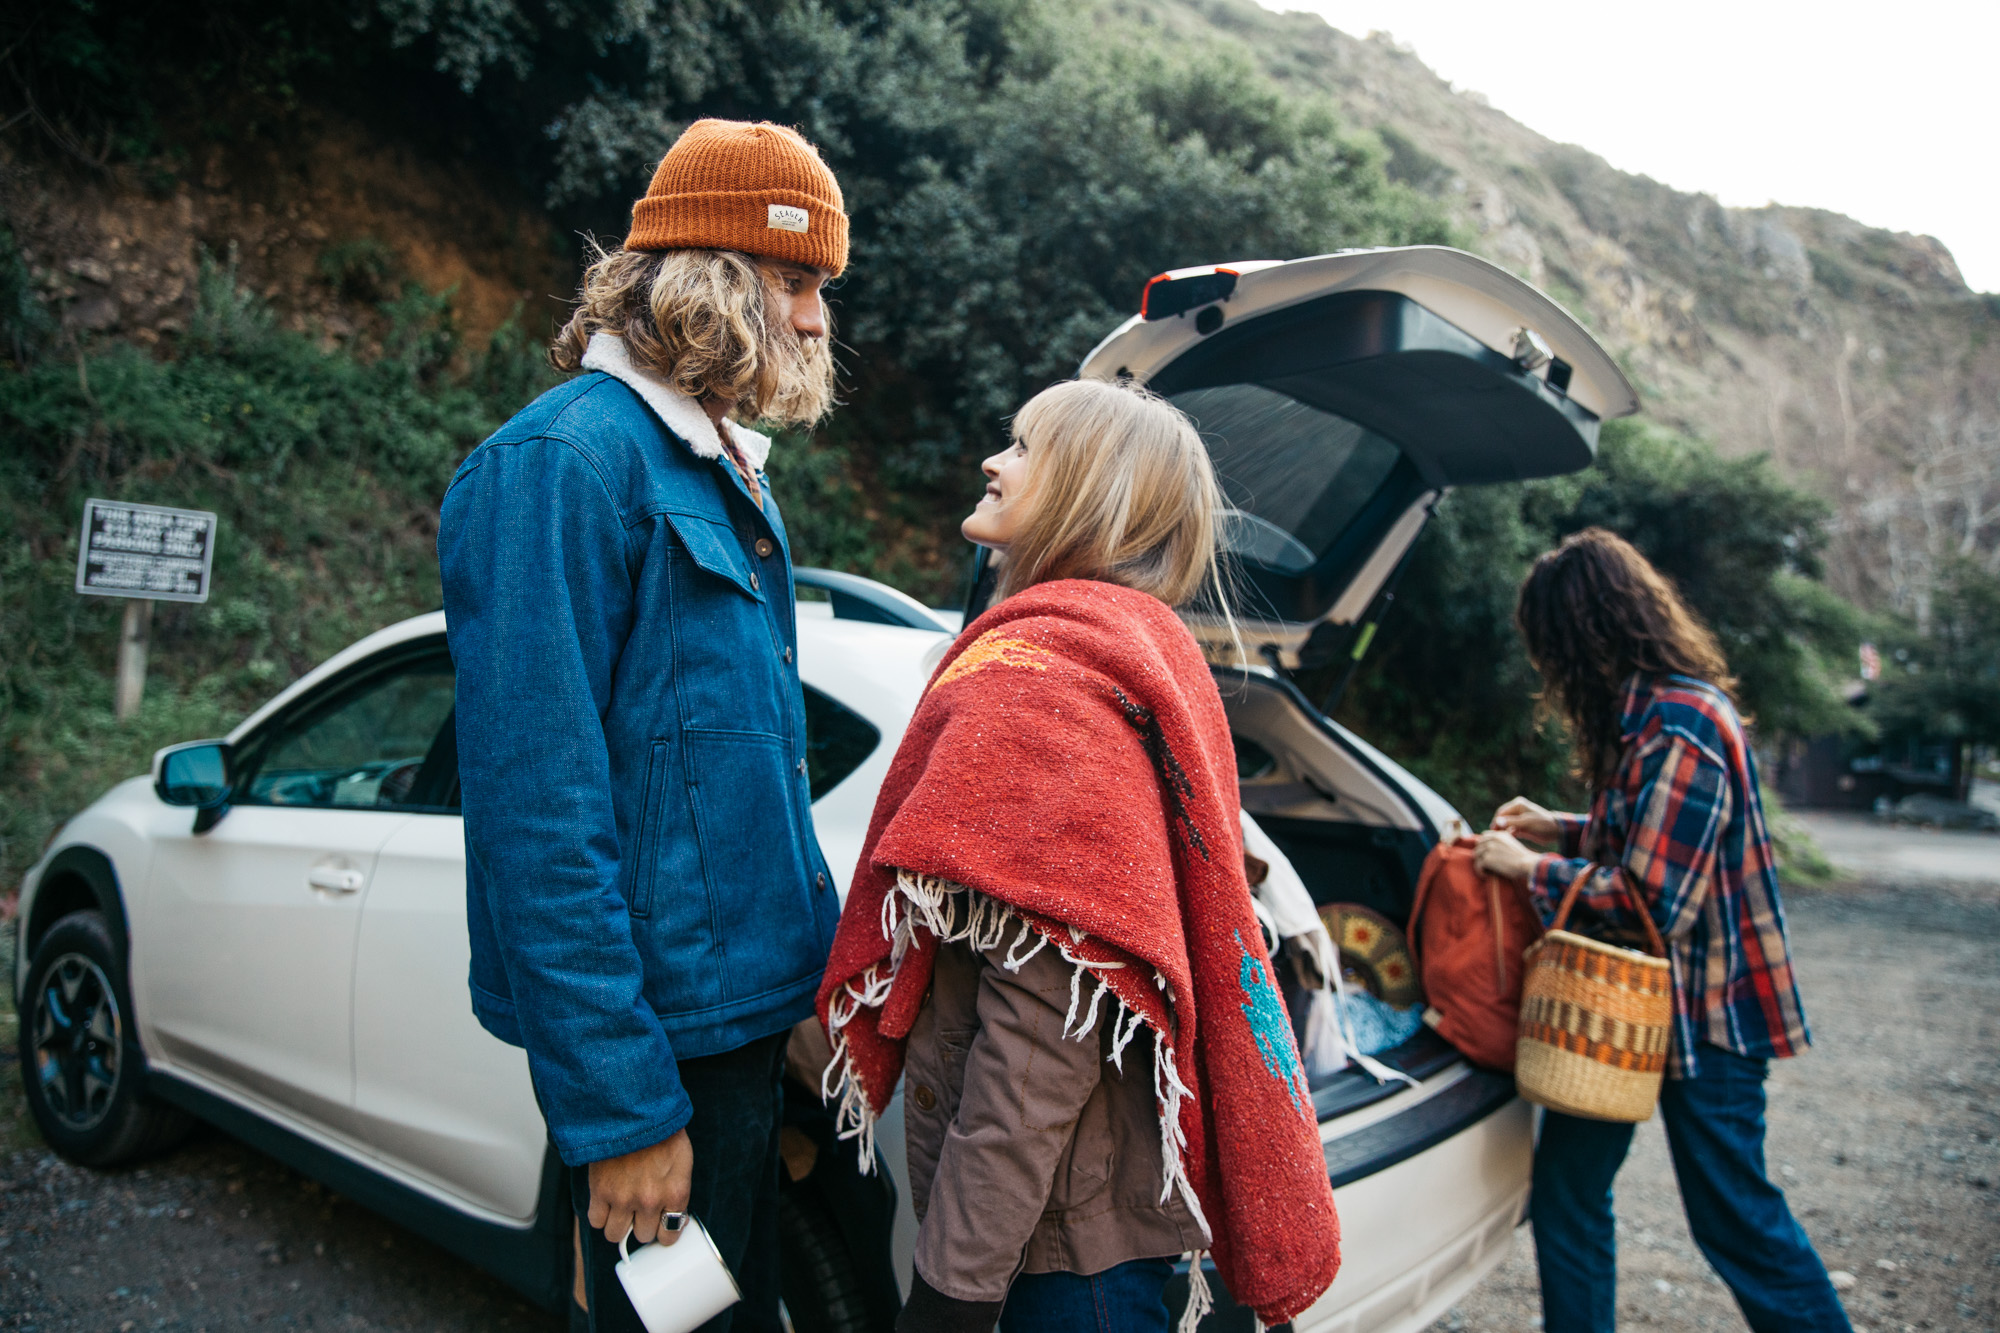 Commercial lifestyle photographer Jenavieve Bel Air's test shoot of a road trip along the coast of Big Sur, California.